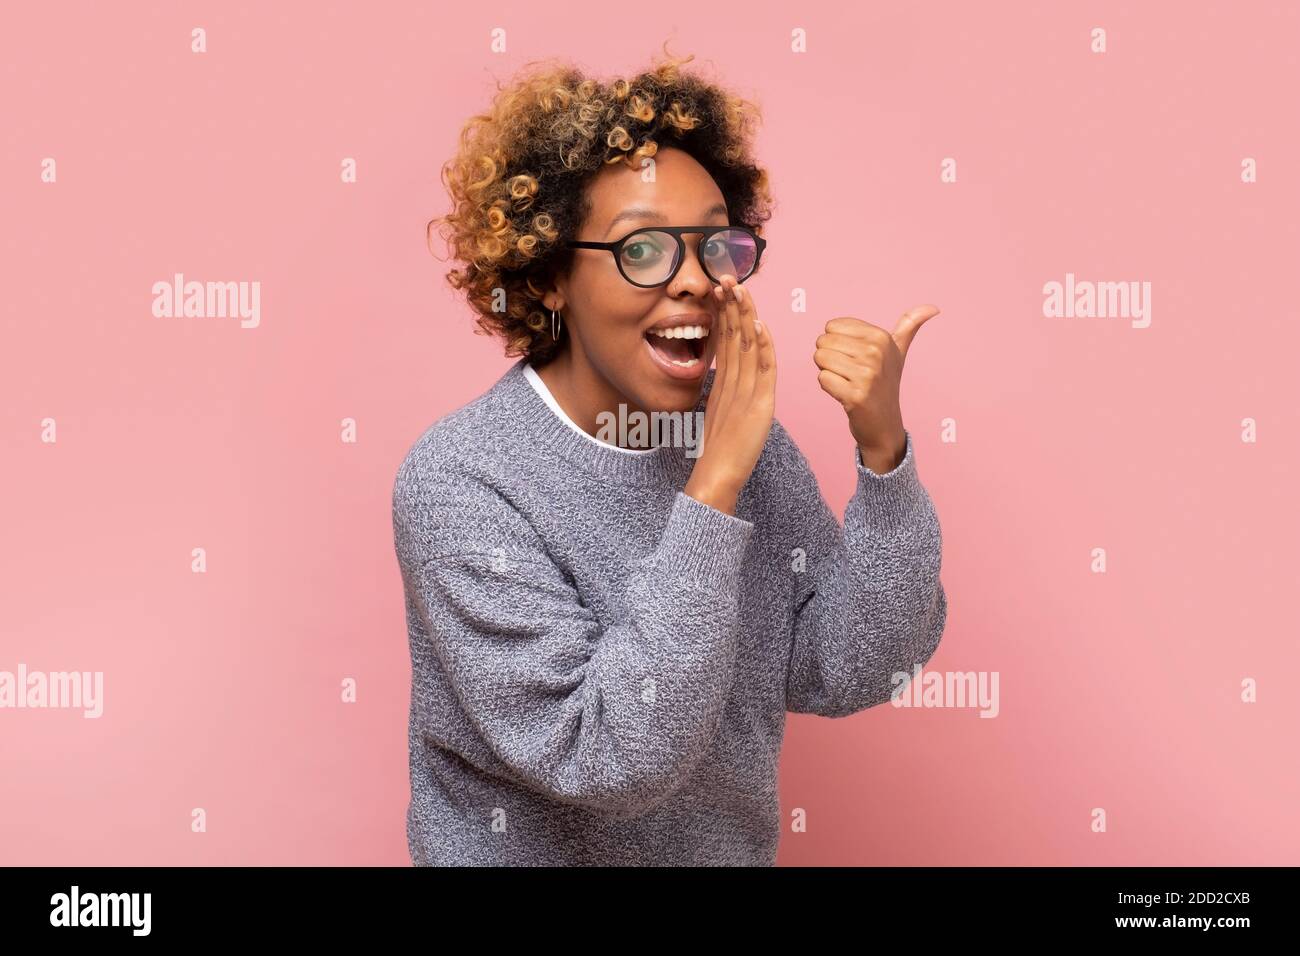 Young african american woman with hand on mouth telling secret or rumor, whispering. Studio shot on pink wall. Stock Photo